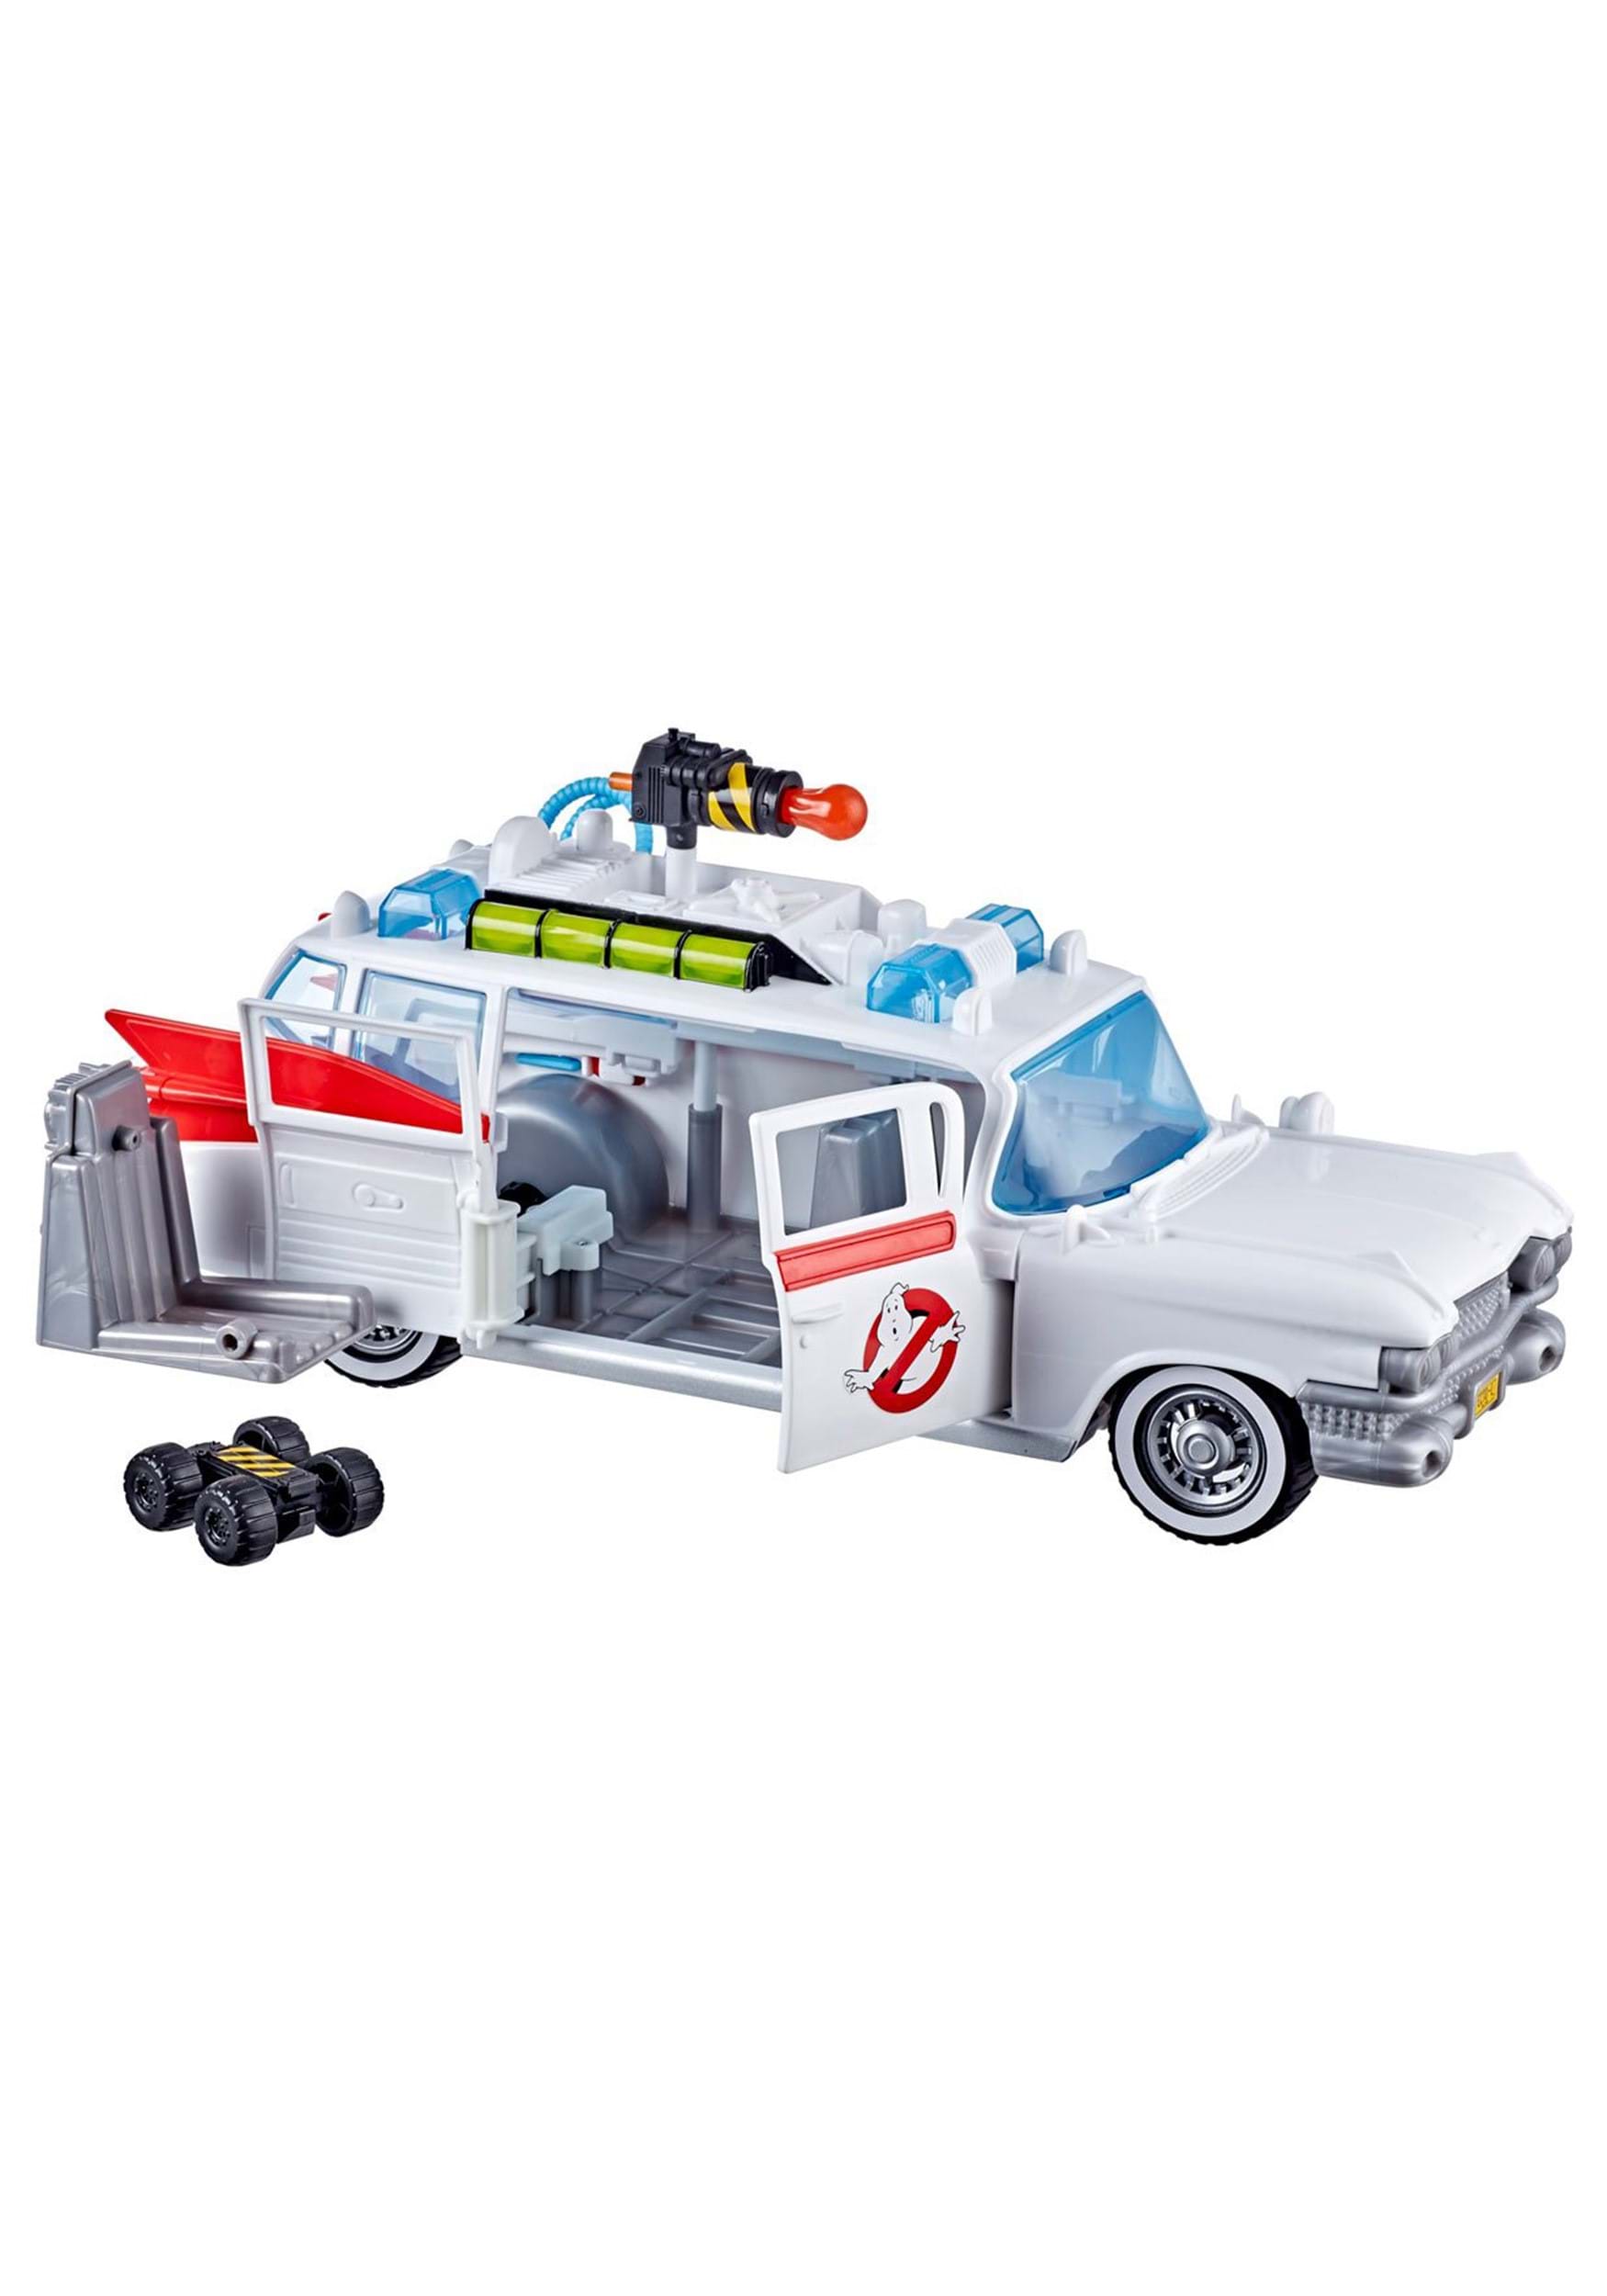 Ecto-1 Ghostbusters Afterlife Vehicle